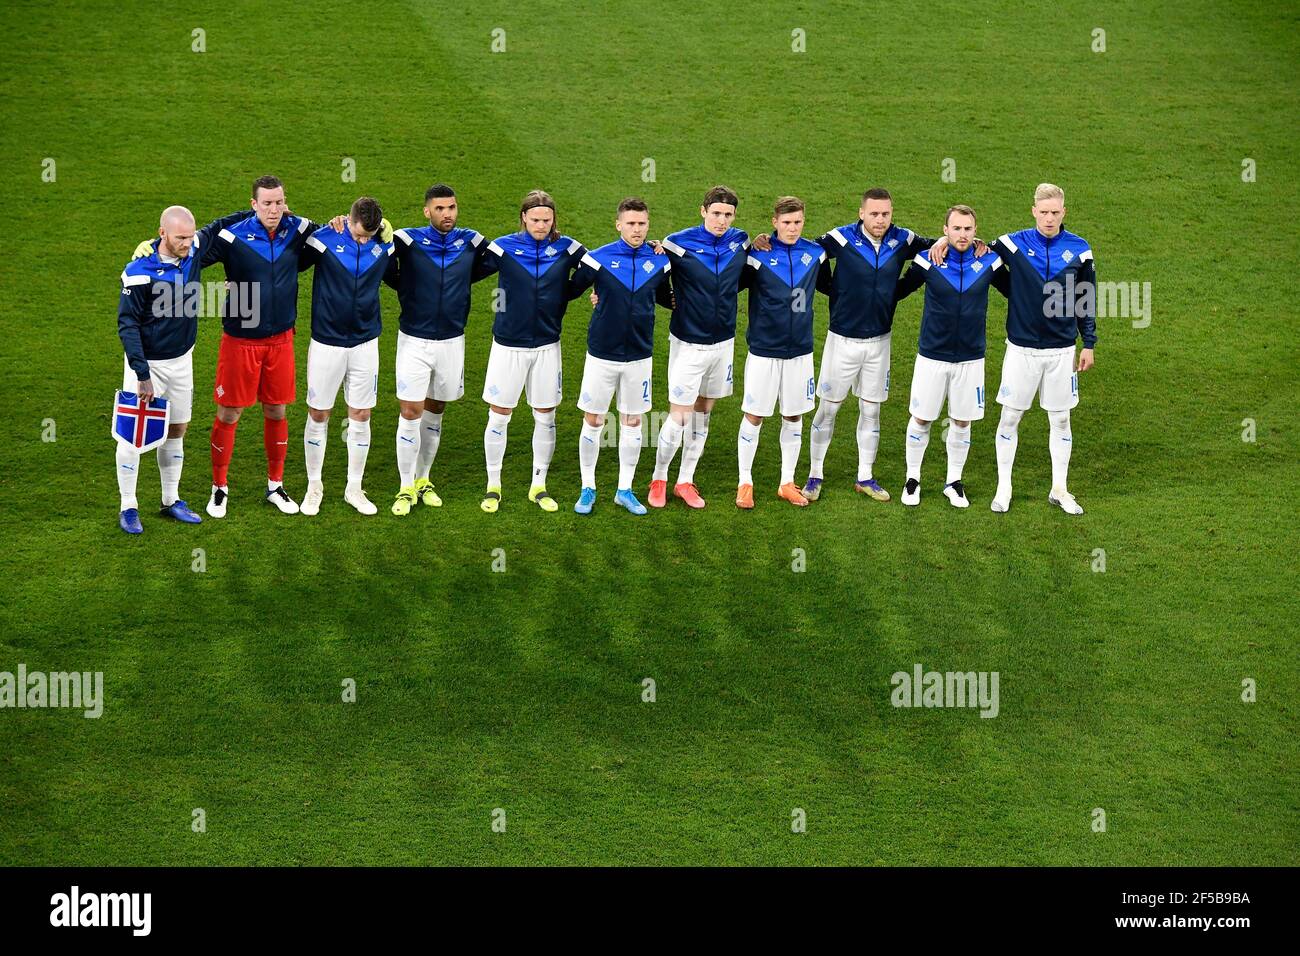 Soccer Football - World Cup Qualifiers Europe - Group J - Germany v Iceland - MSV-Arena, Duisburg, Germany - March 25, 2021 Iceland line up before the match Pool via REUTERS/Tobias Schwarz Stock Photo